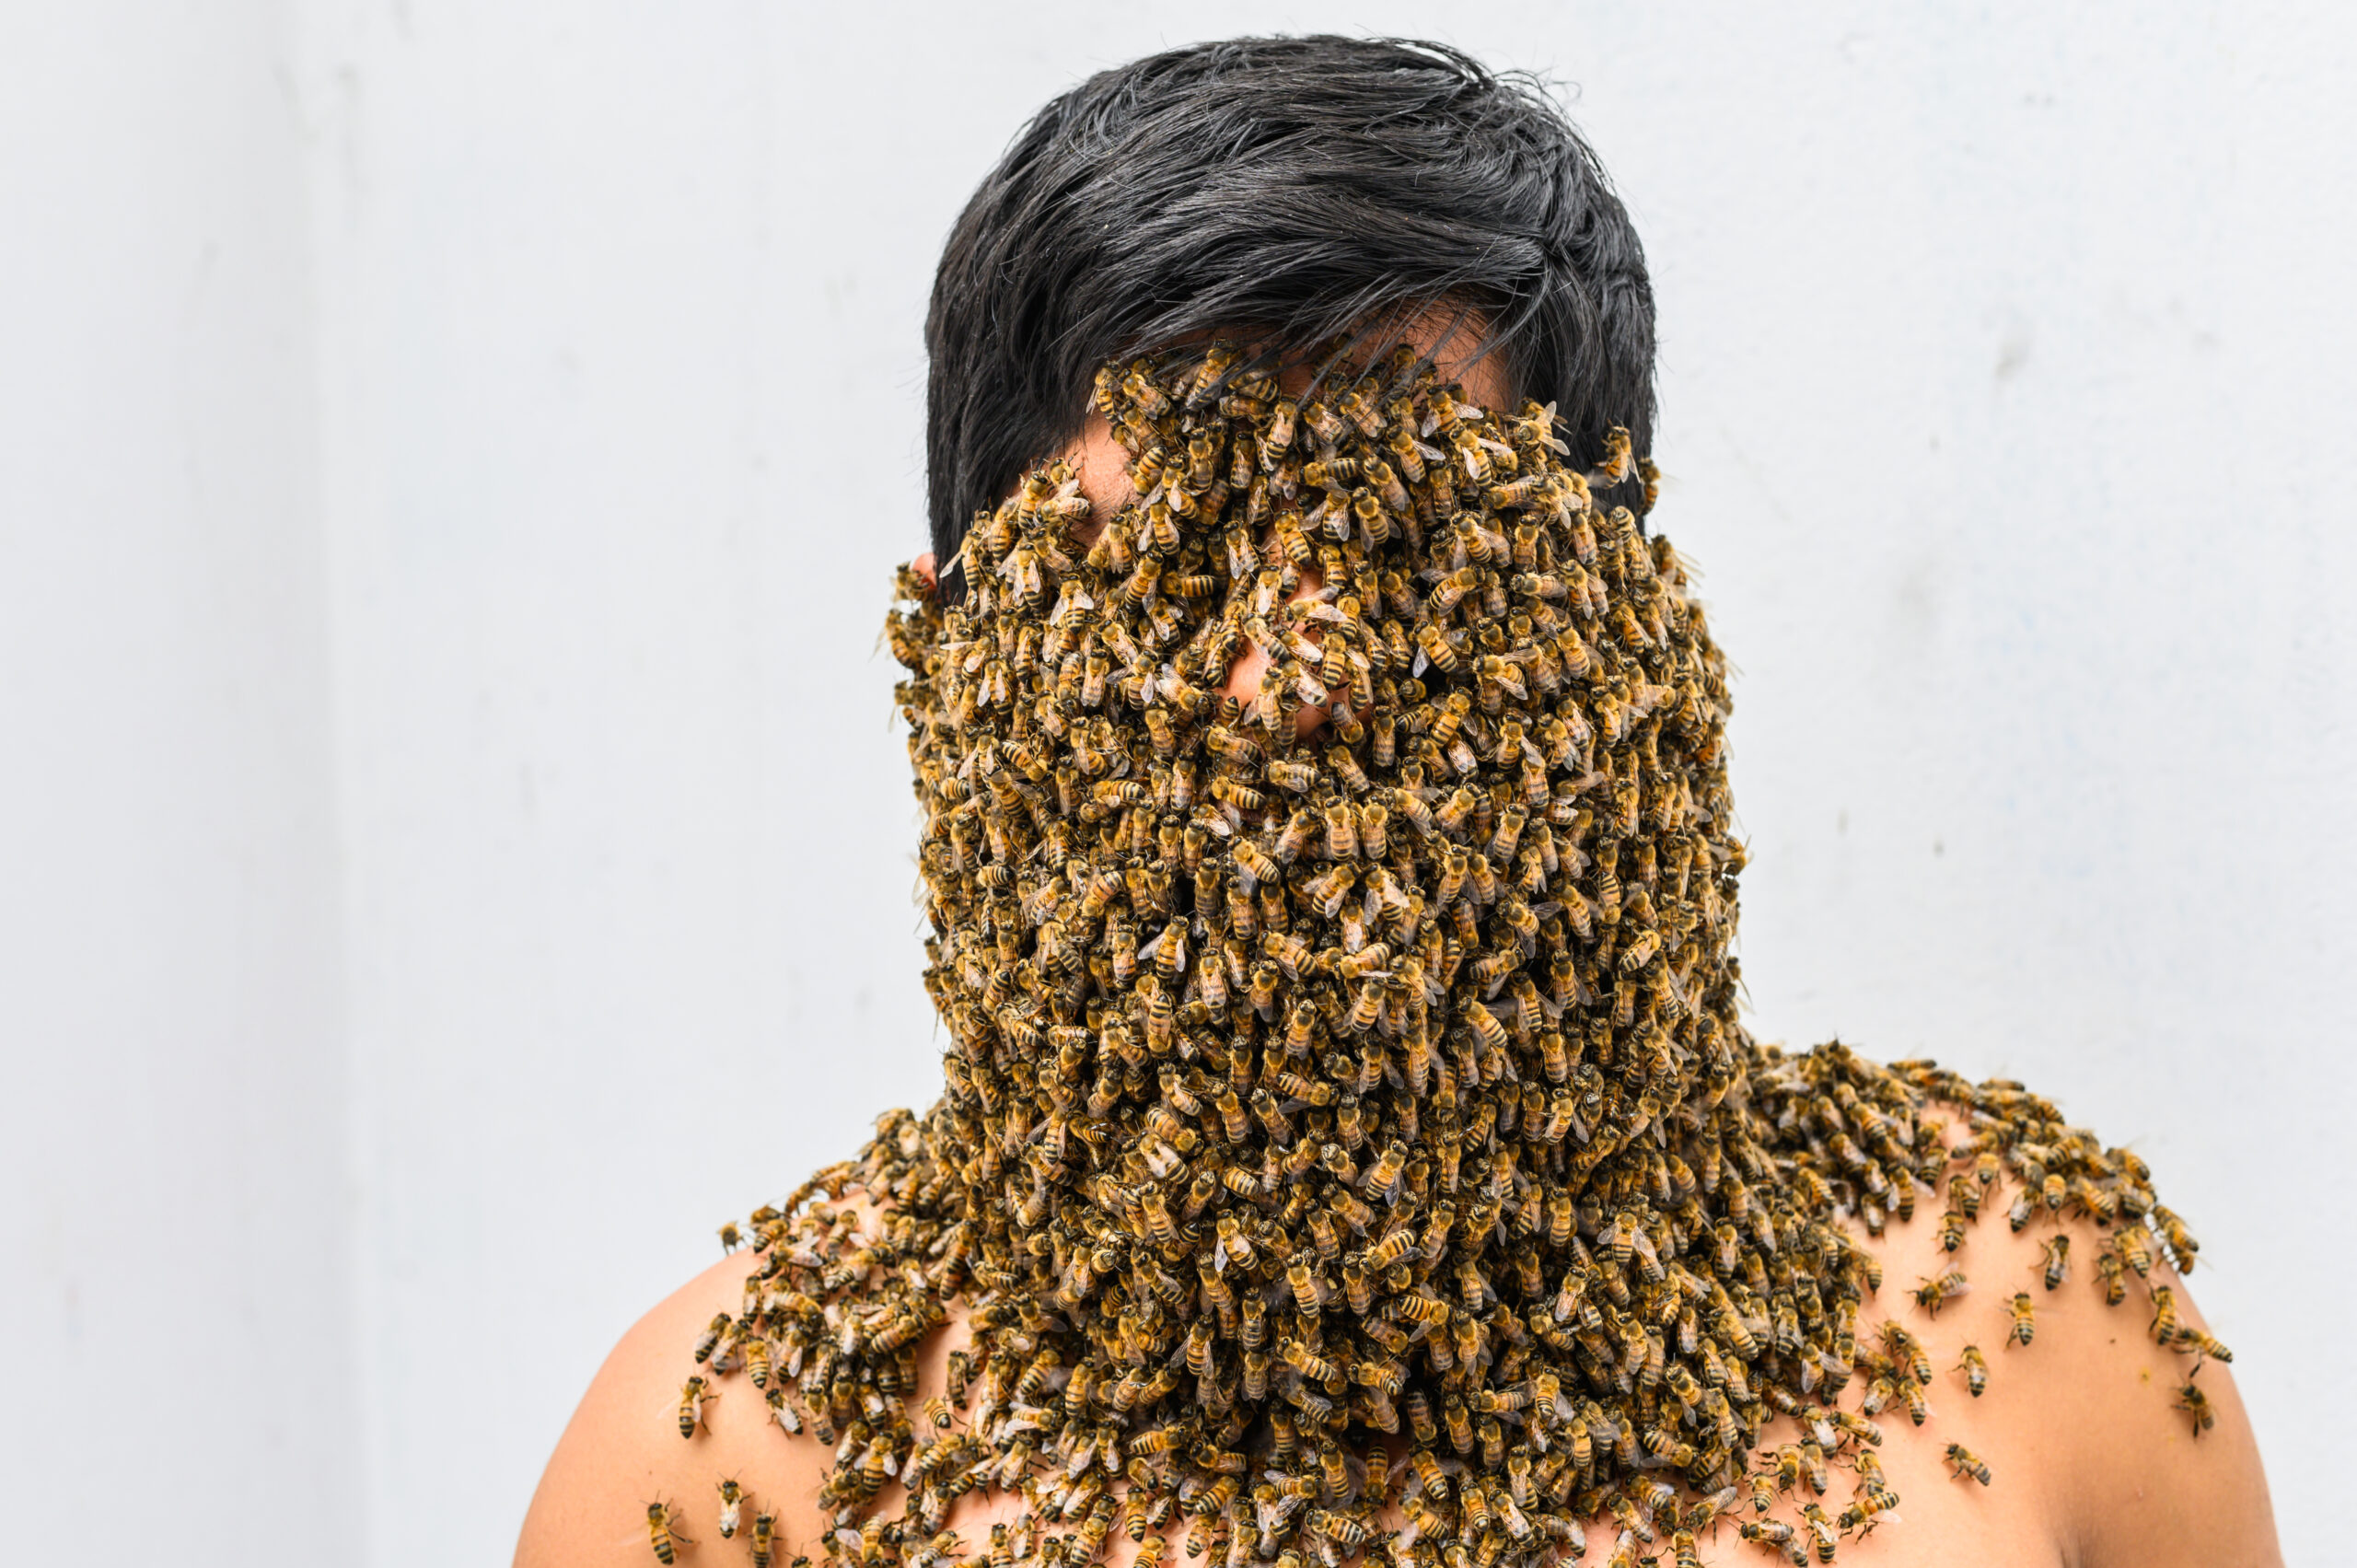 Beekeeper covered by bees, he has the queen bee on his neck so all the bees stick to his body.